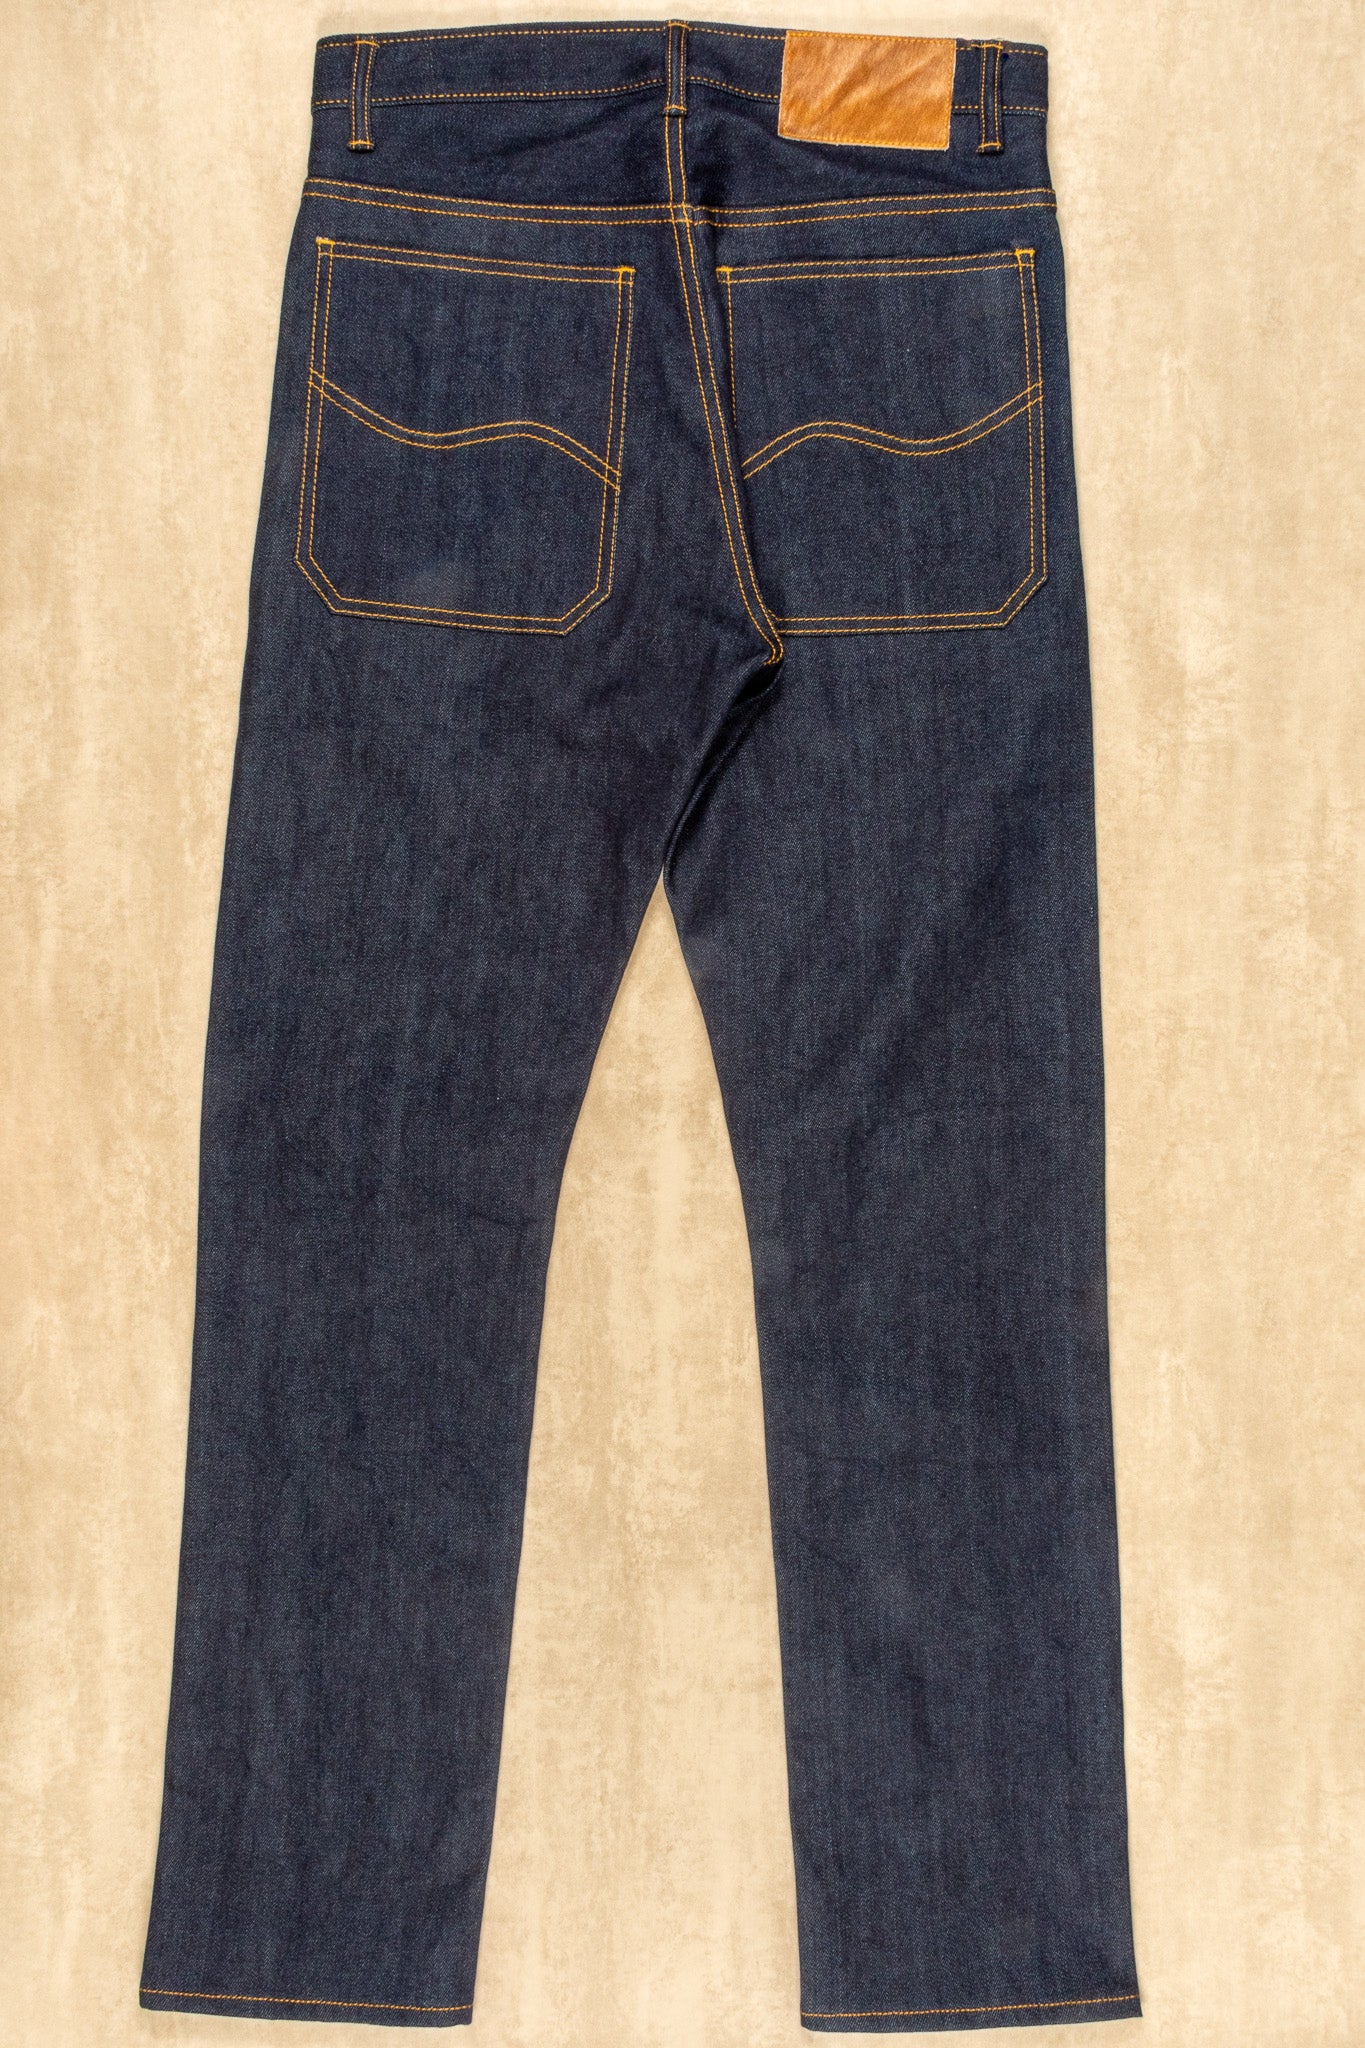 Two-tone Stretch Workman Selvedge Jeans